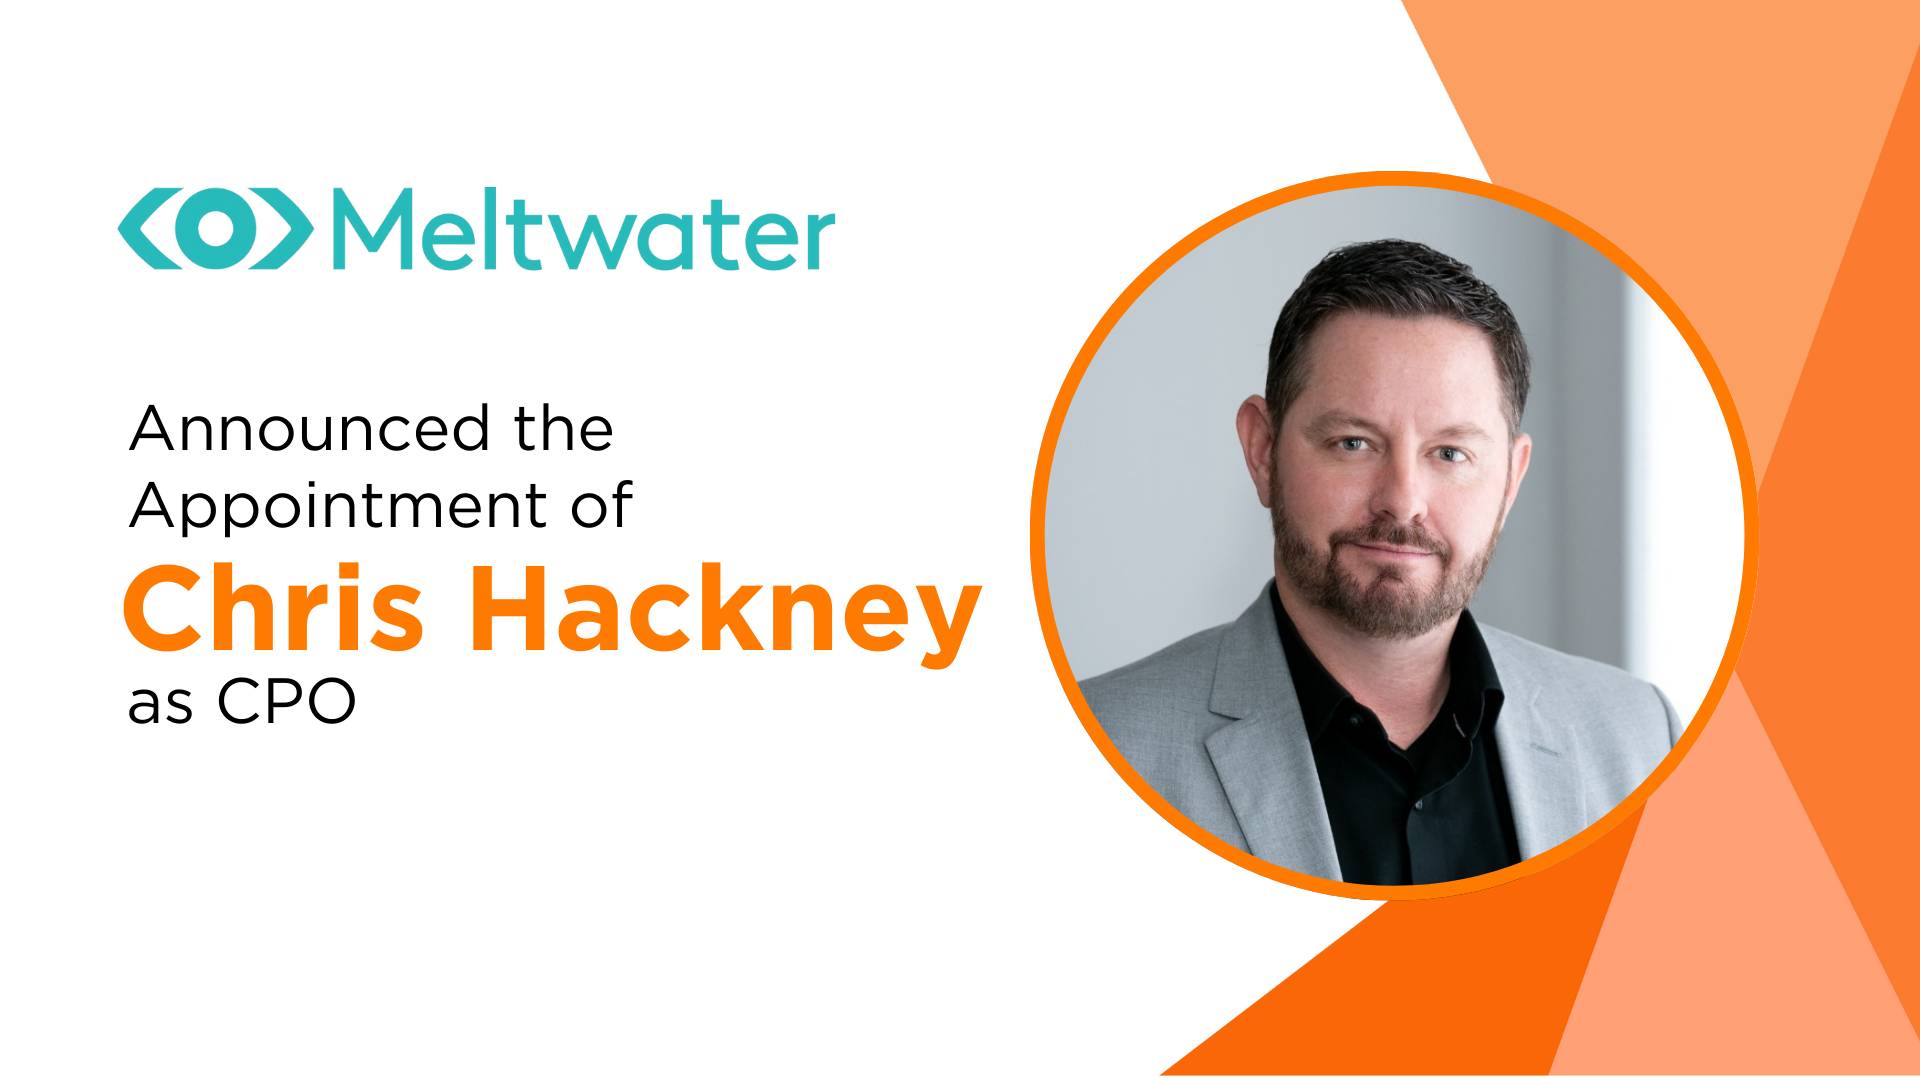 Meltwater Appoints Chris Hackney as Chief Product Officer to Drive Innovation and Customer-Centric Growth